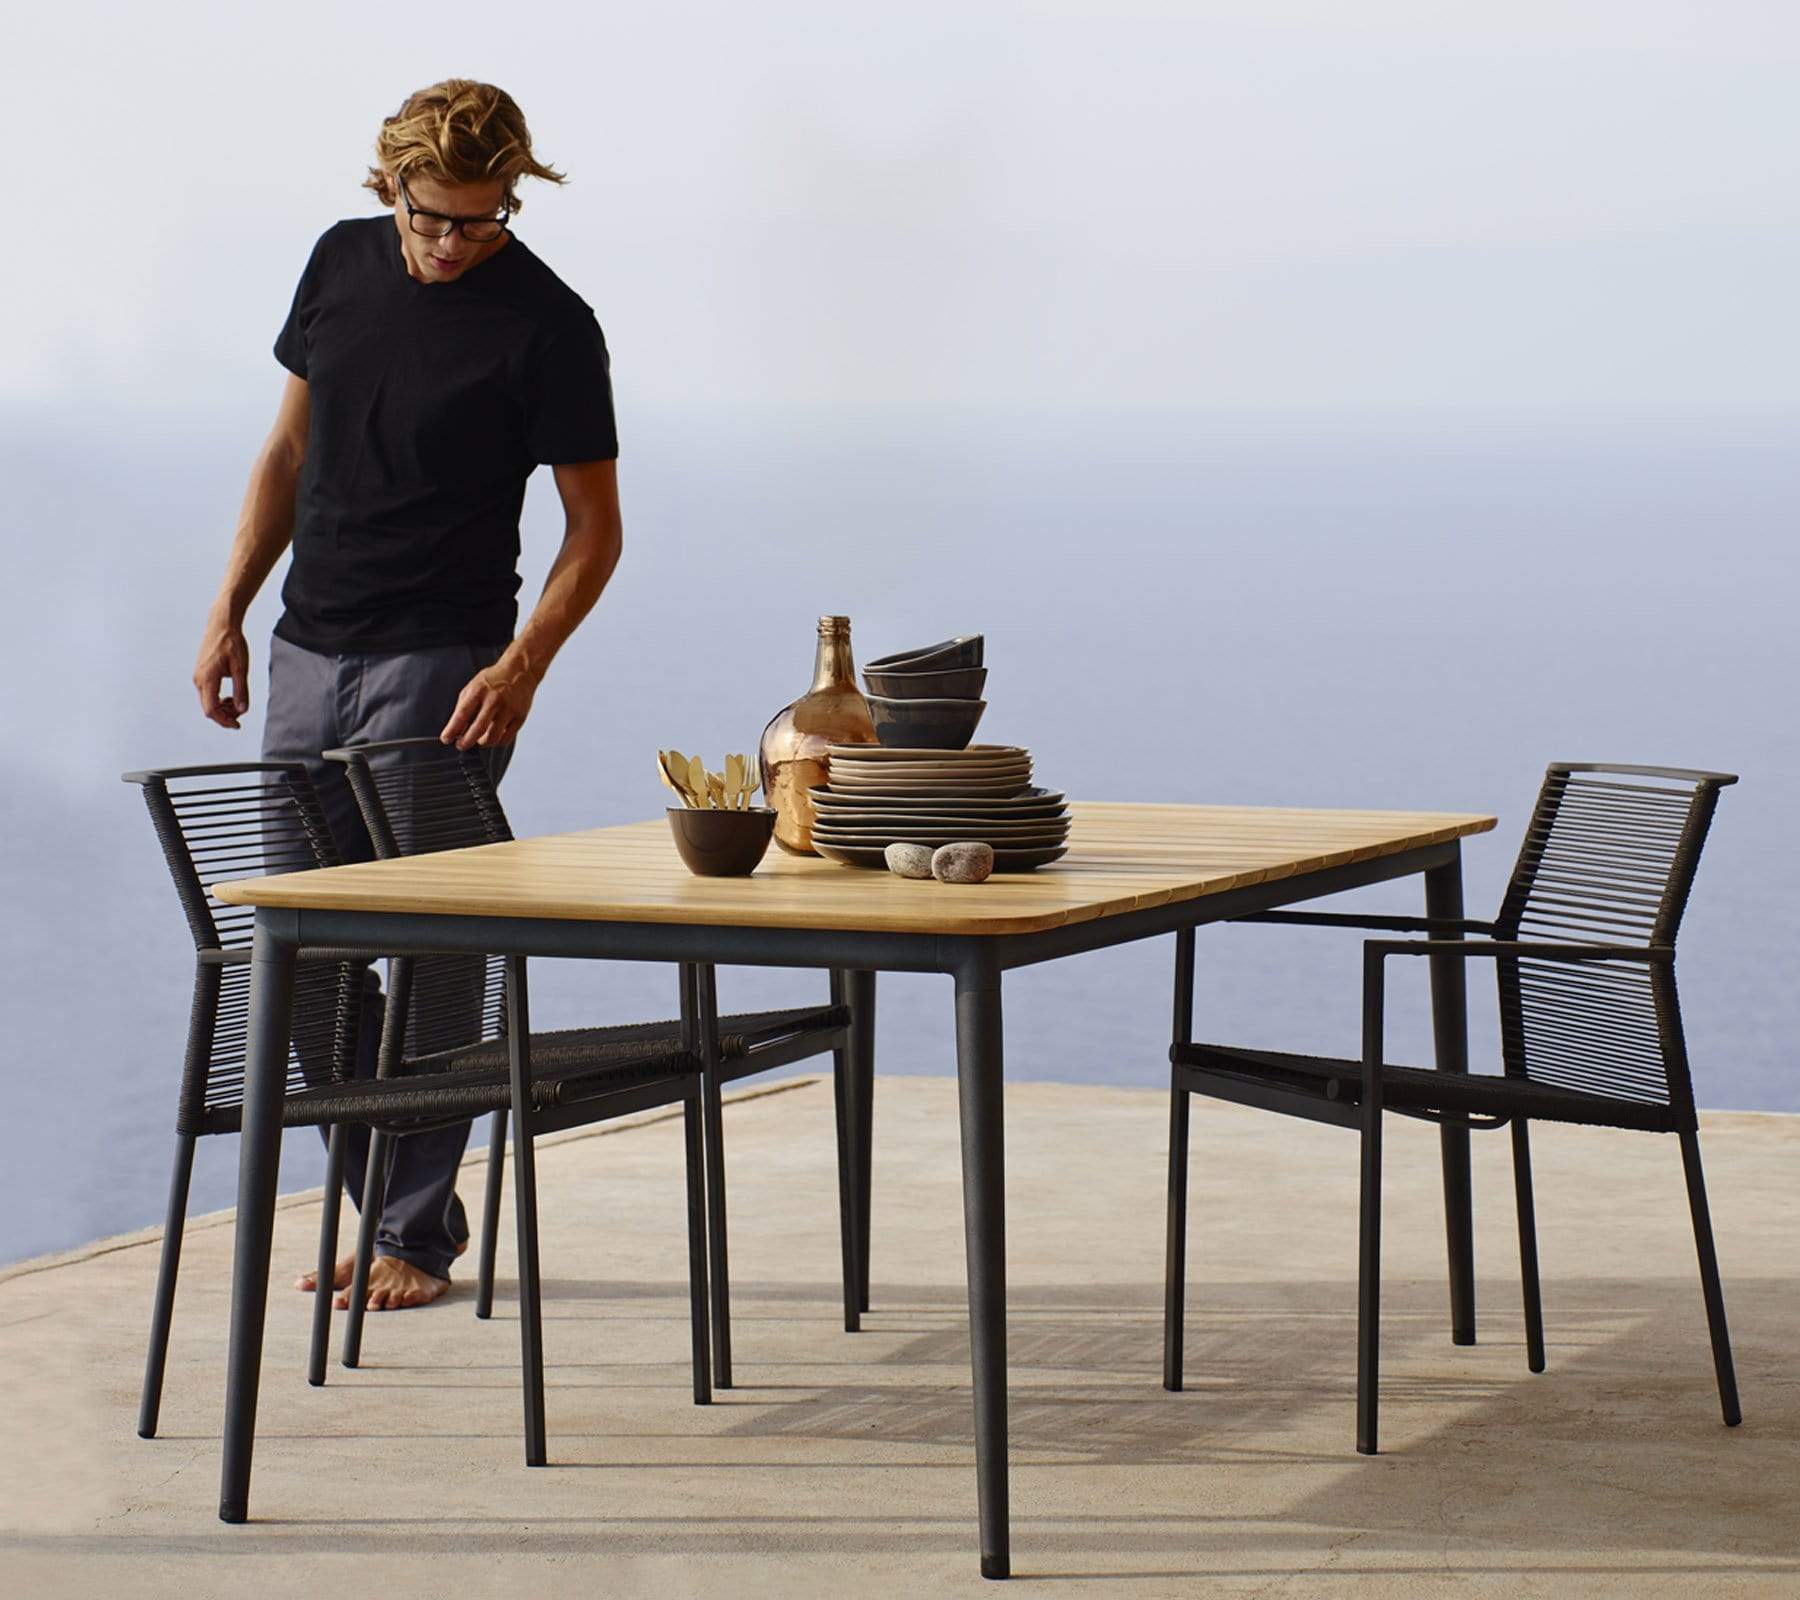 Boxhill's Edge Stackable Outdoor Armchair lifestyle image at seafront with teak top dining table and a man standing at the side